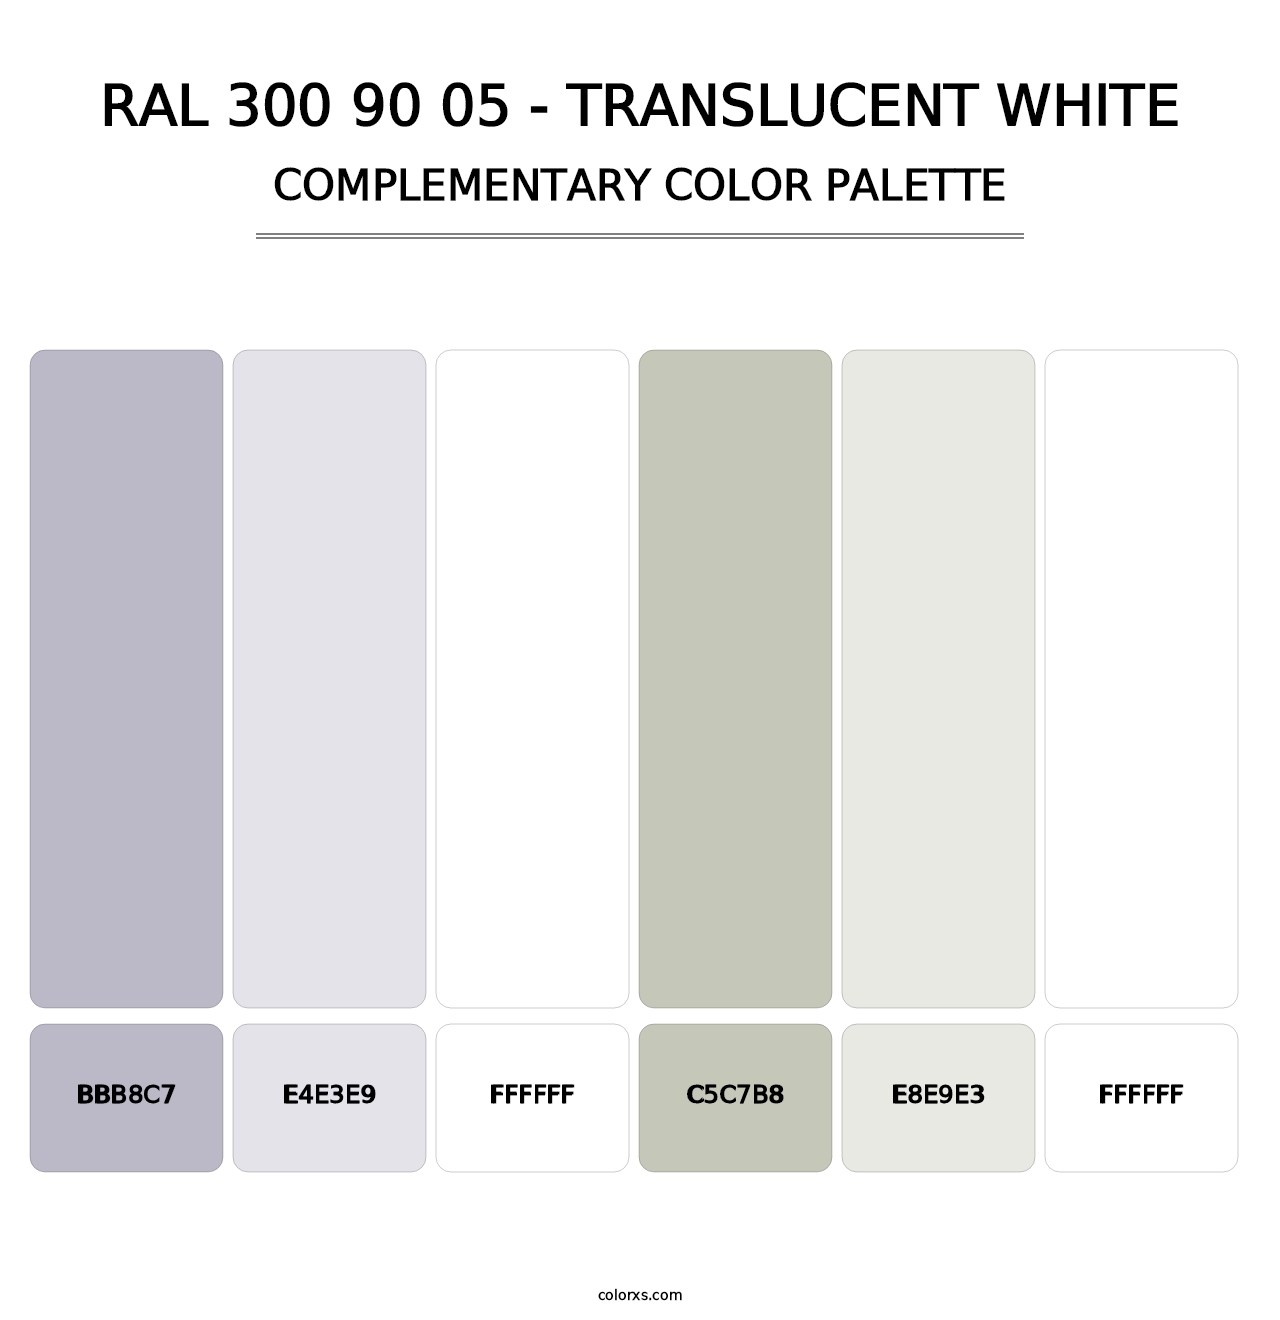 RAL 300 90 05 - Translucent White - Complementary Color Palette